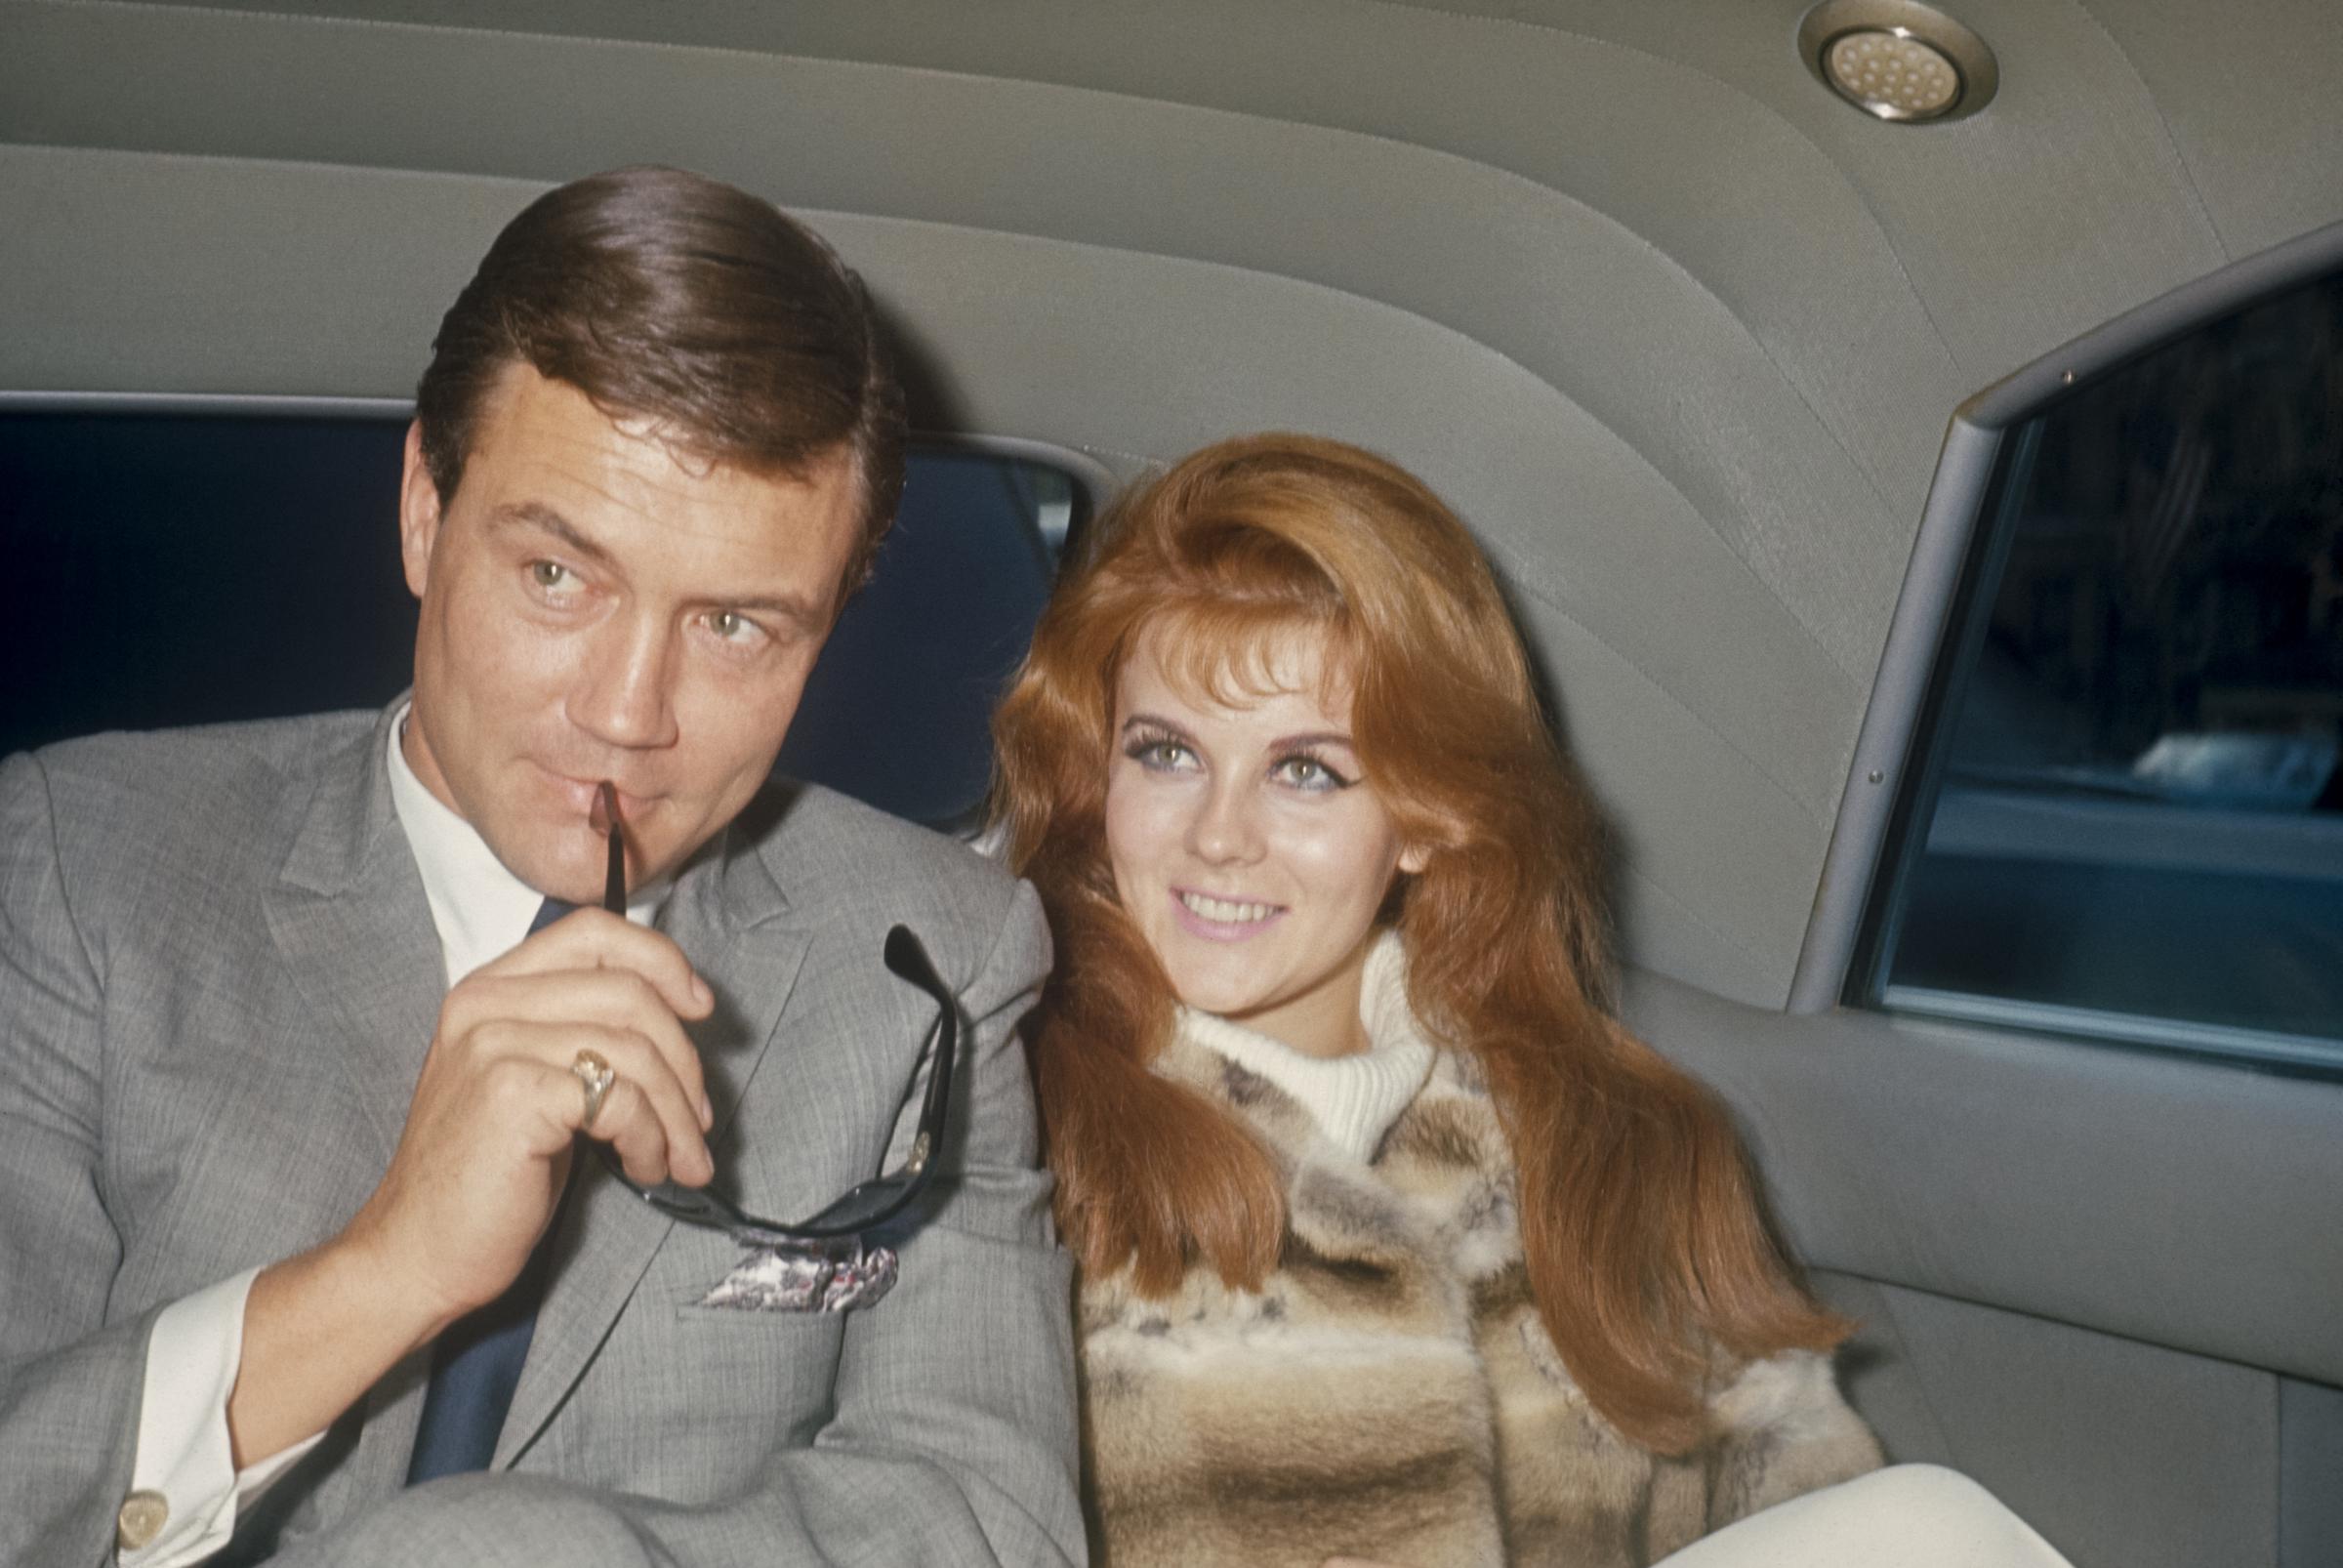 Roger Smith and Ann-Margret in the back of a limo on January 1, 1970 in New York. | Source: Getty Images